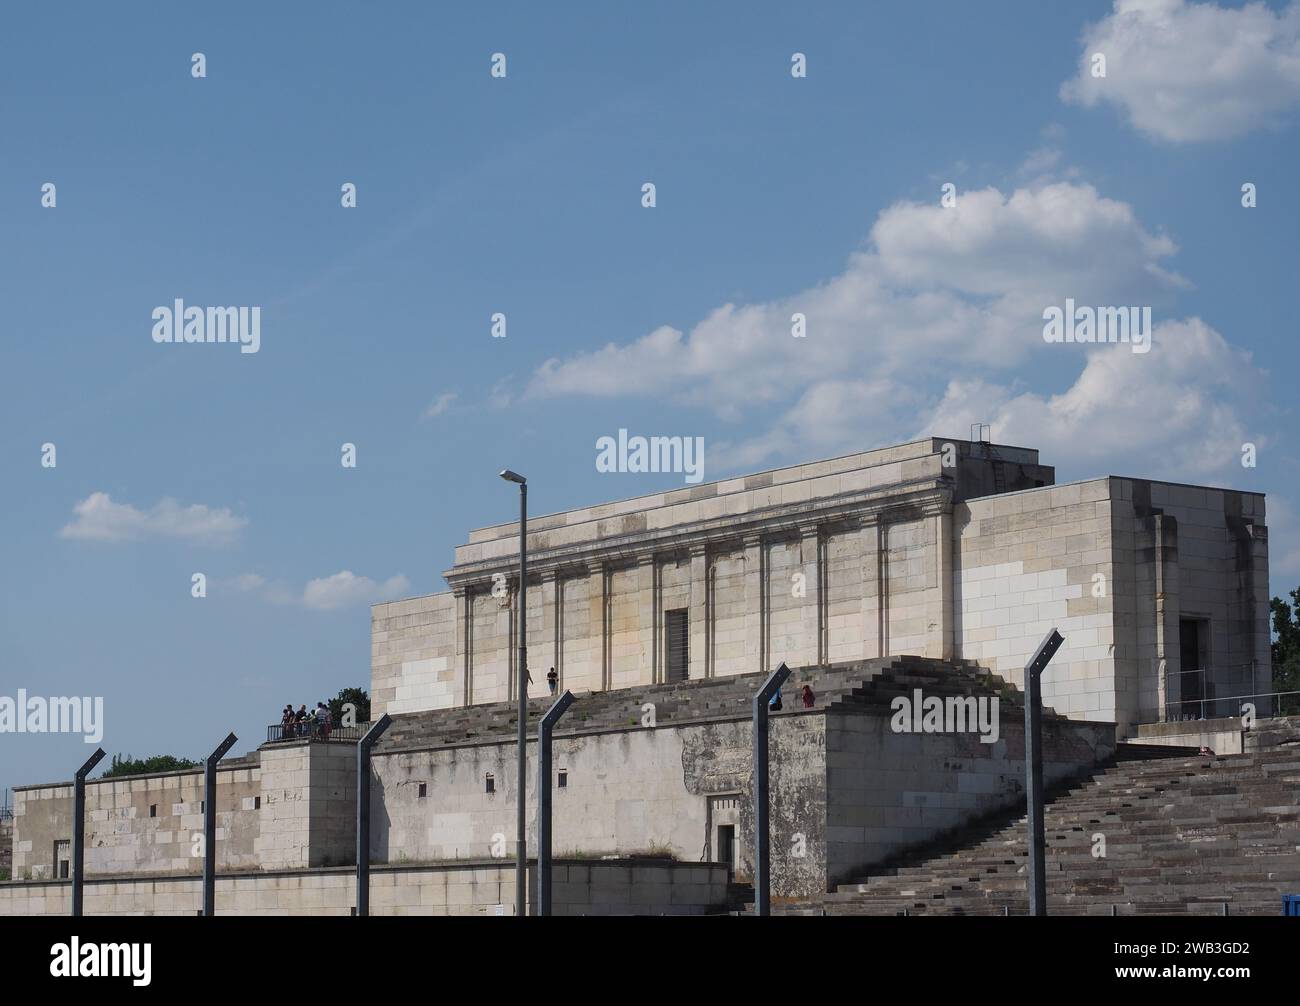 NUERNBERG, GERMANY - CIRCA JUNE 2022: Zeppelinfeld Translation Zeppelin Field Tribune Designed By Architect Albert Speer As Part Of The Nazi Party Ral Stock Photo